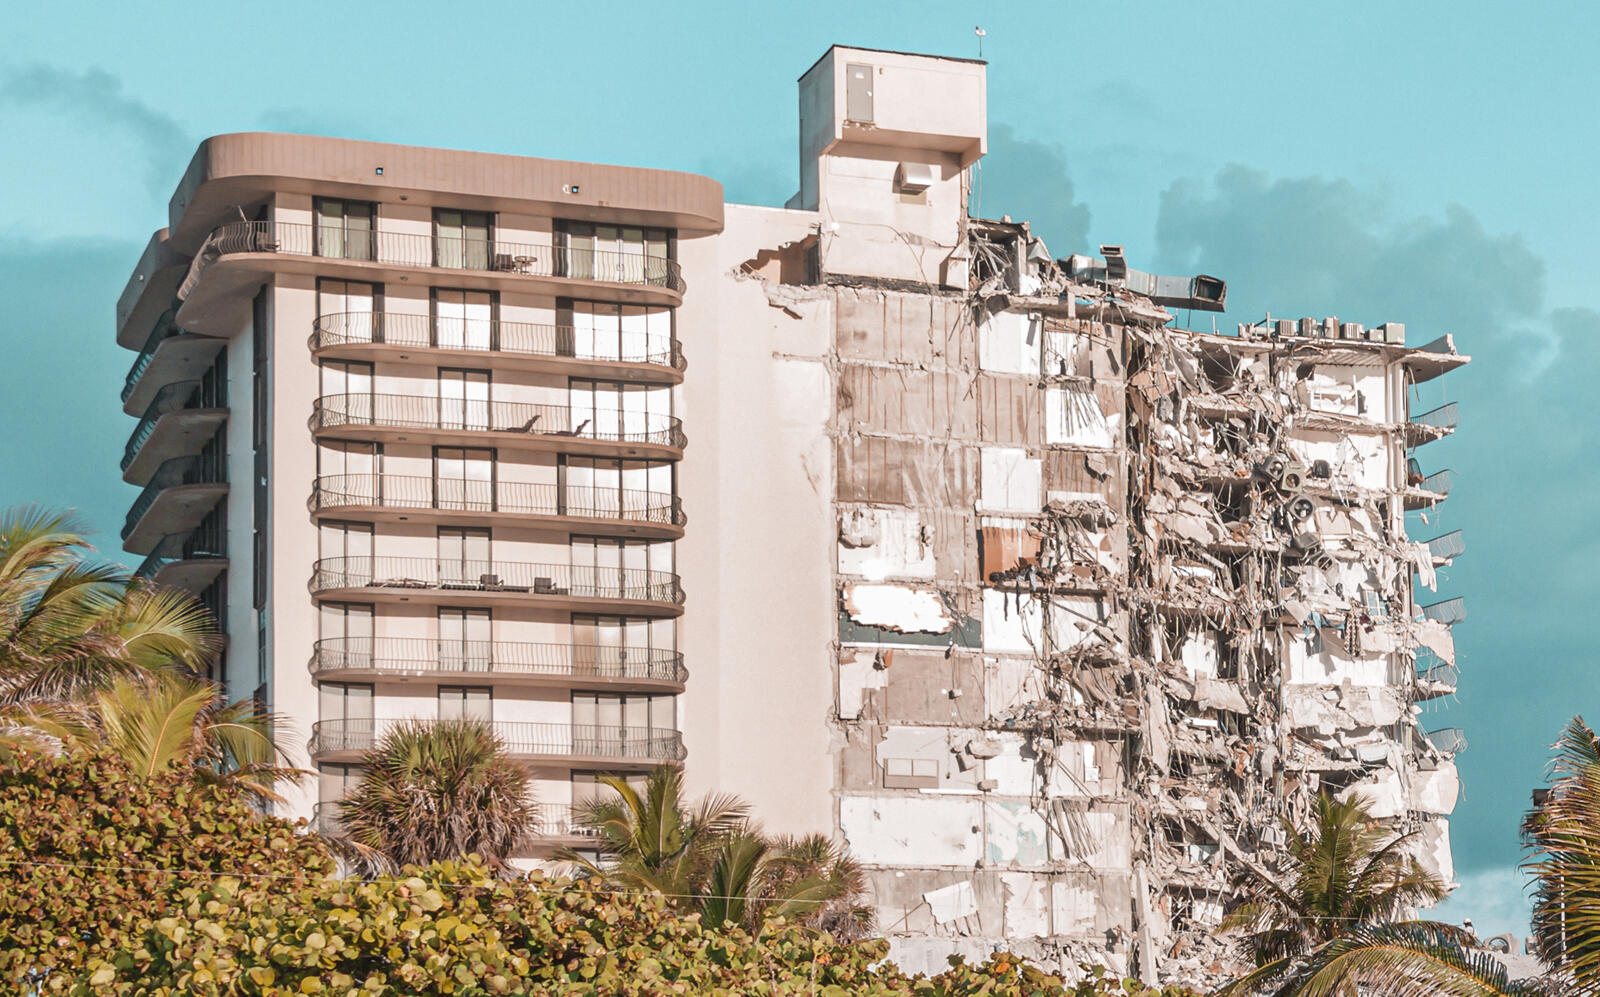 The partial collapse of the Surfside condo (Getty)